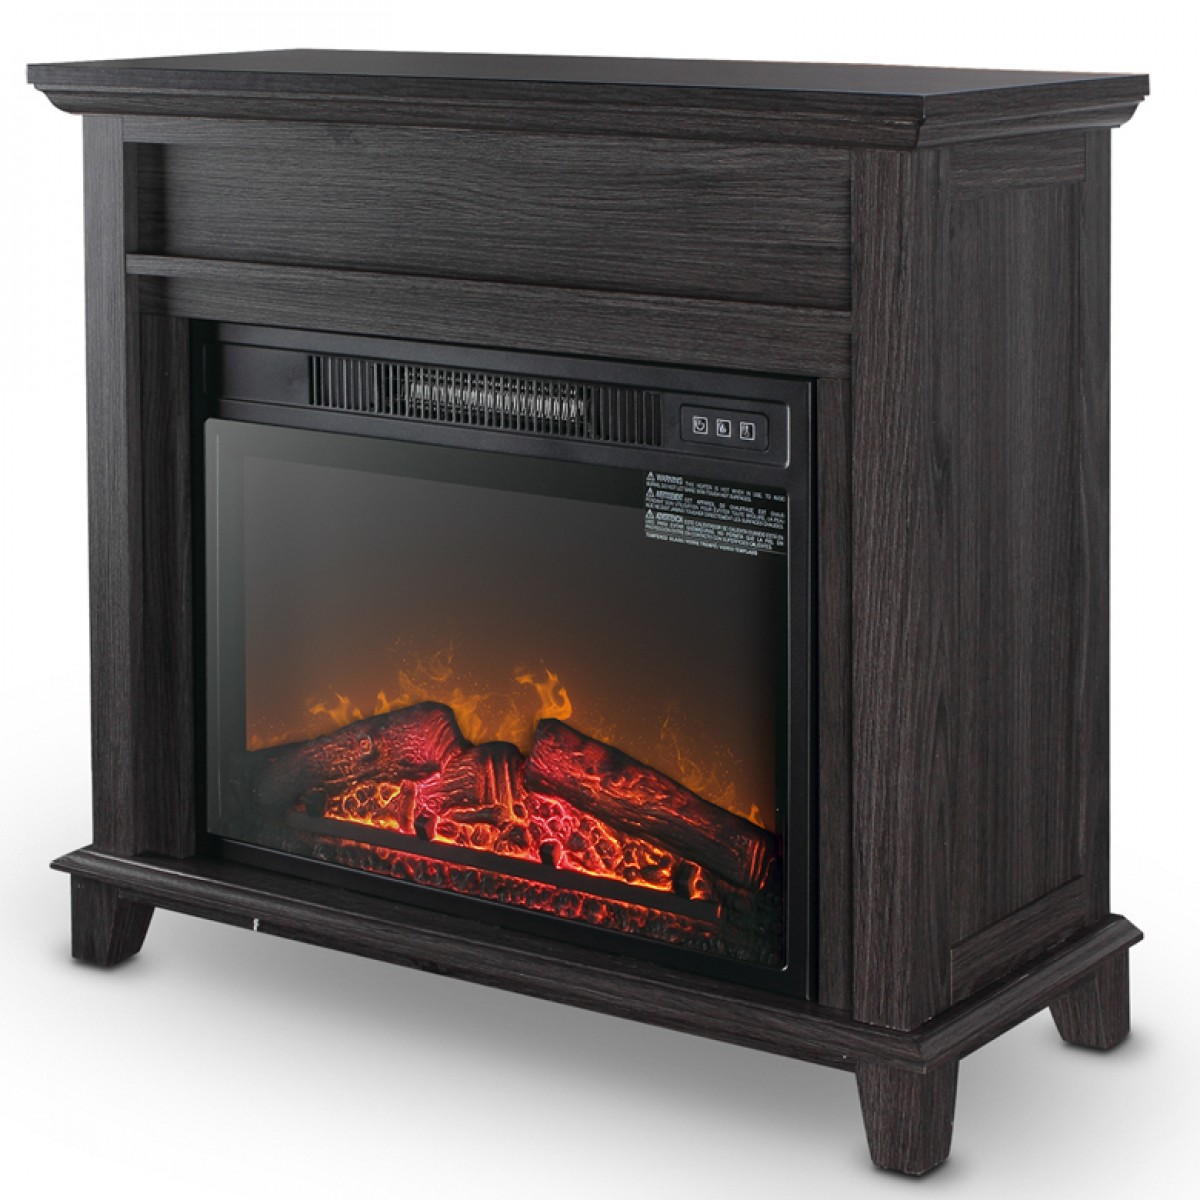 Heat Surge Amish Fireplace Inspirational Home and Garden Electric Fireplace